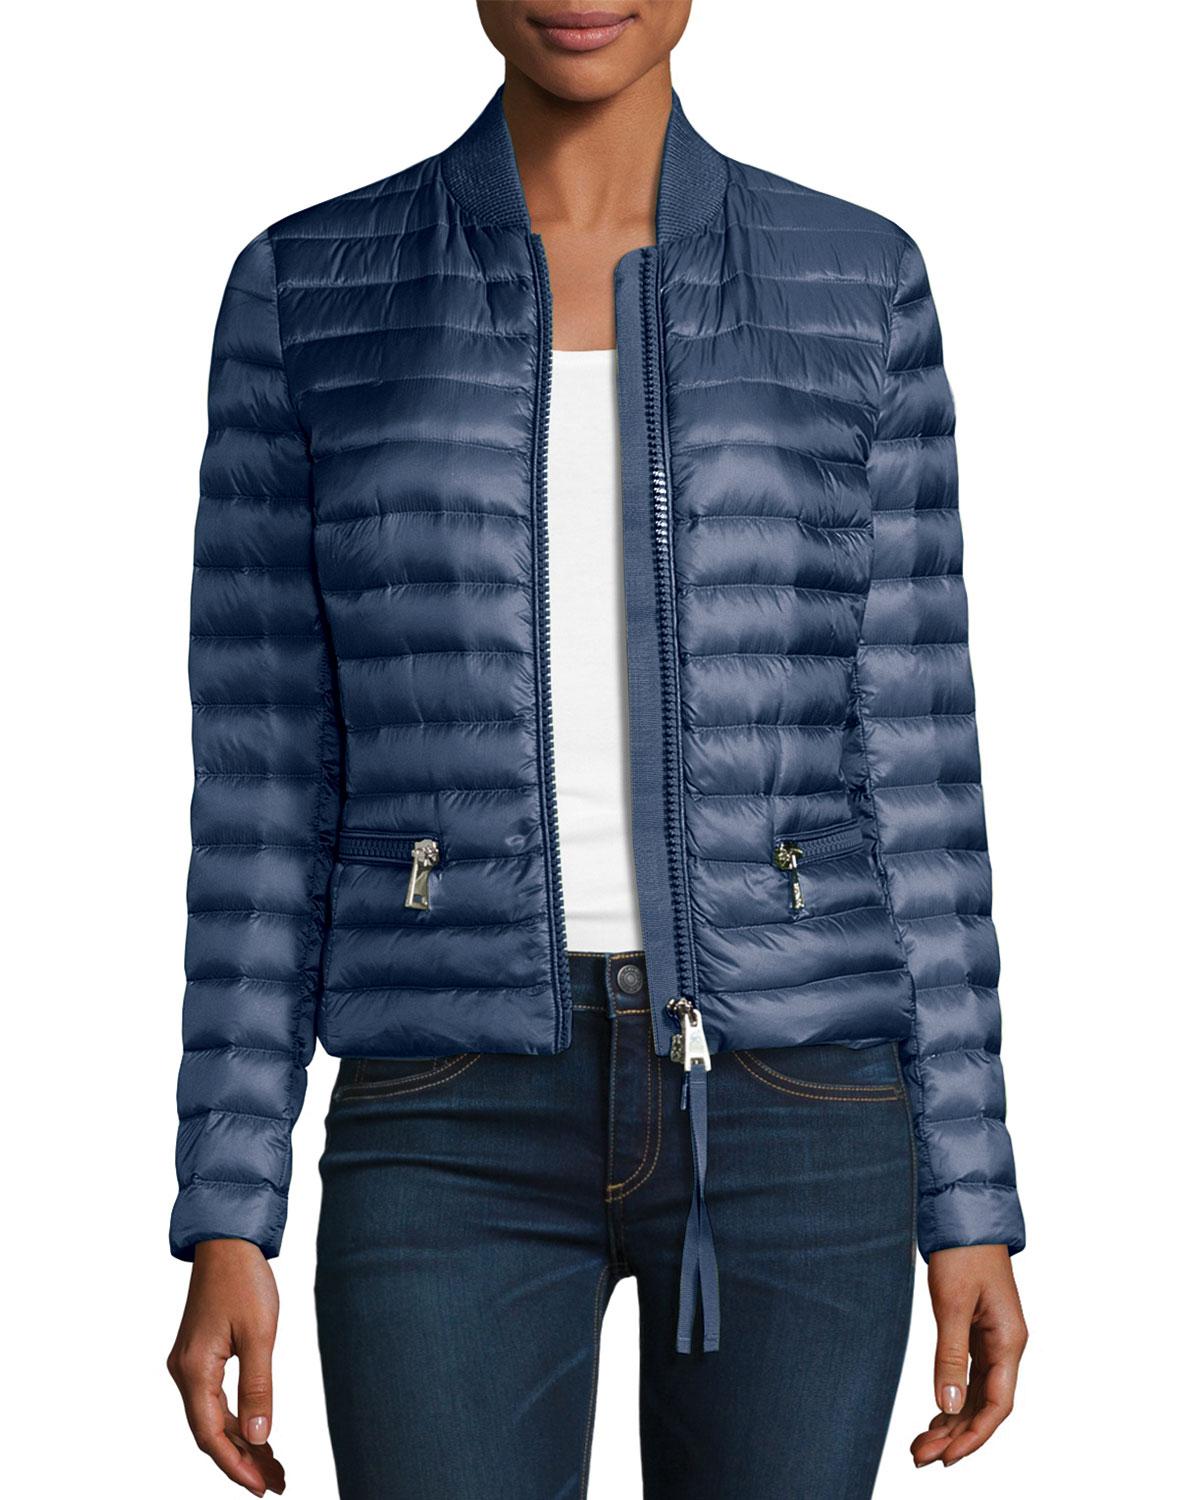 Lyst - Moncler Blen Fitted Down Jacket in White